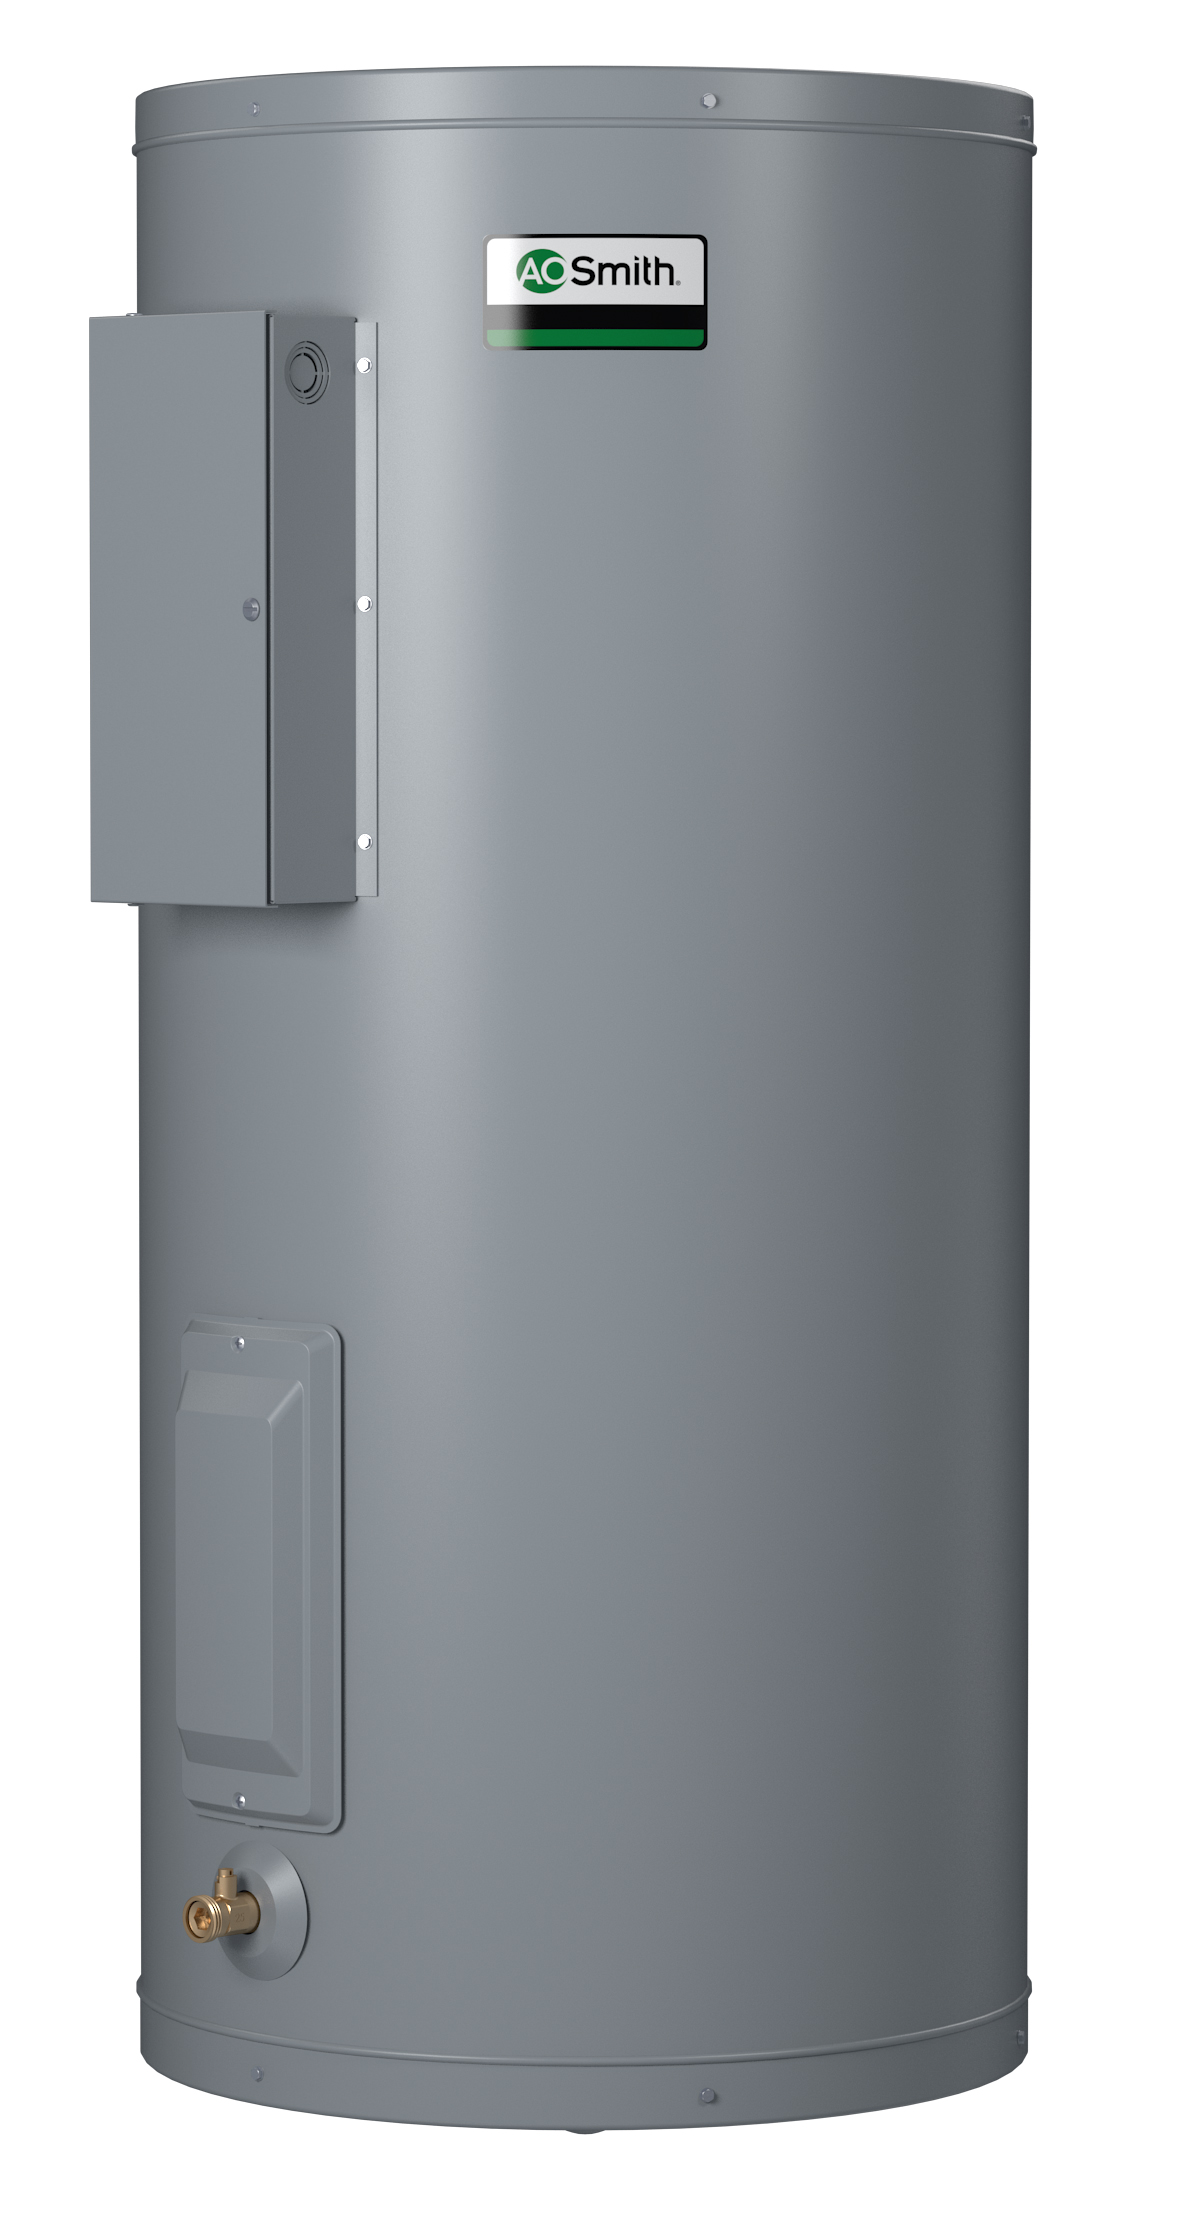 AO SMITH DEN-120D: 120 GALLONS, 2.5 KW, 120 VOLT, 1 PHASE, (2-2500 WATT ELEMENTS, NON-SIMULTANEOUS WIRING), DURA-POWER, LIGHT DUTY COMMERCIAL ELECTRIC WATER HEATER